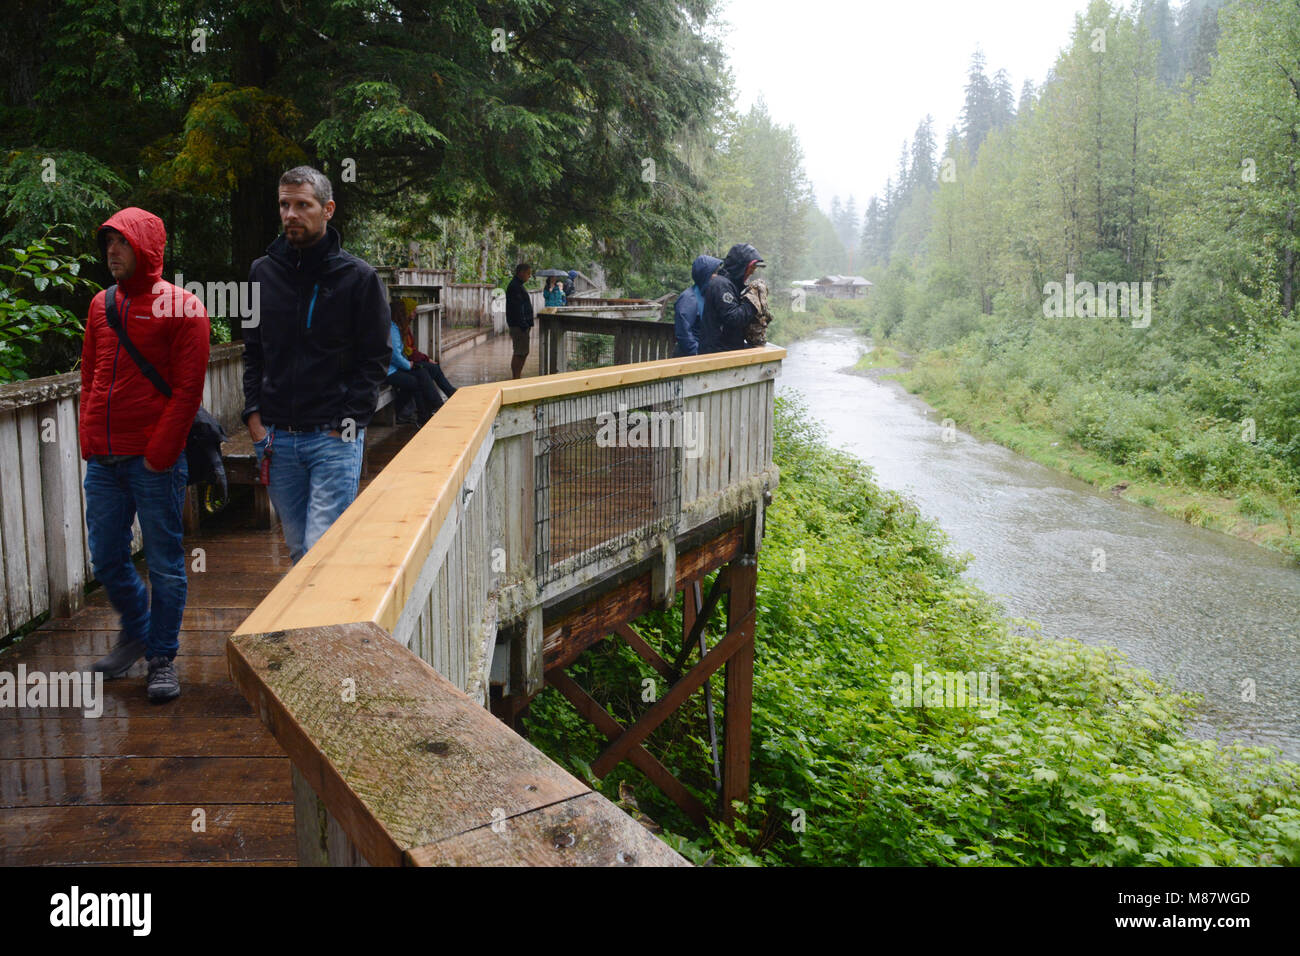 Tourists on the bear viewing platform at the Fish Creek Wildlife Observation Site, in the Tongass National Forest, near Hyder, Alaska. Stock Photo